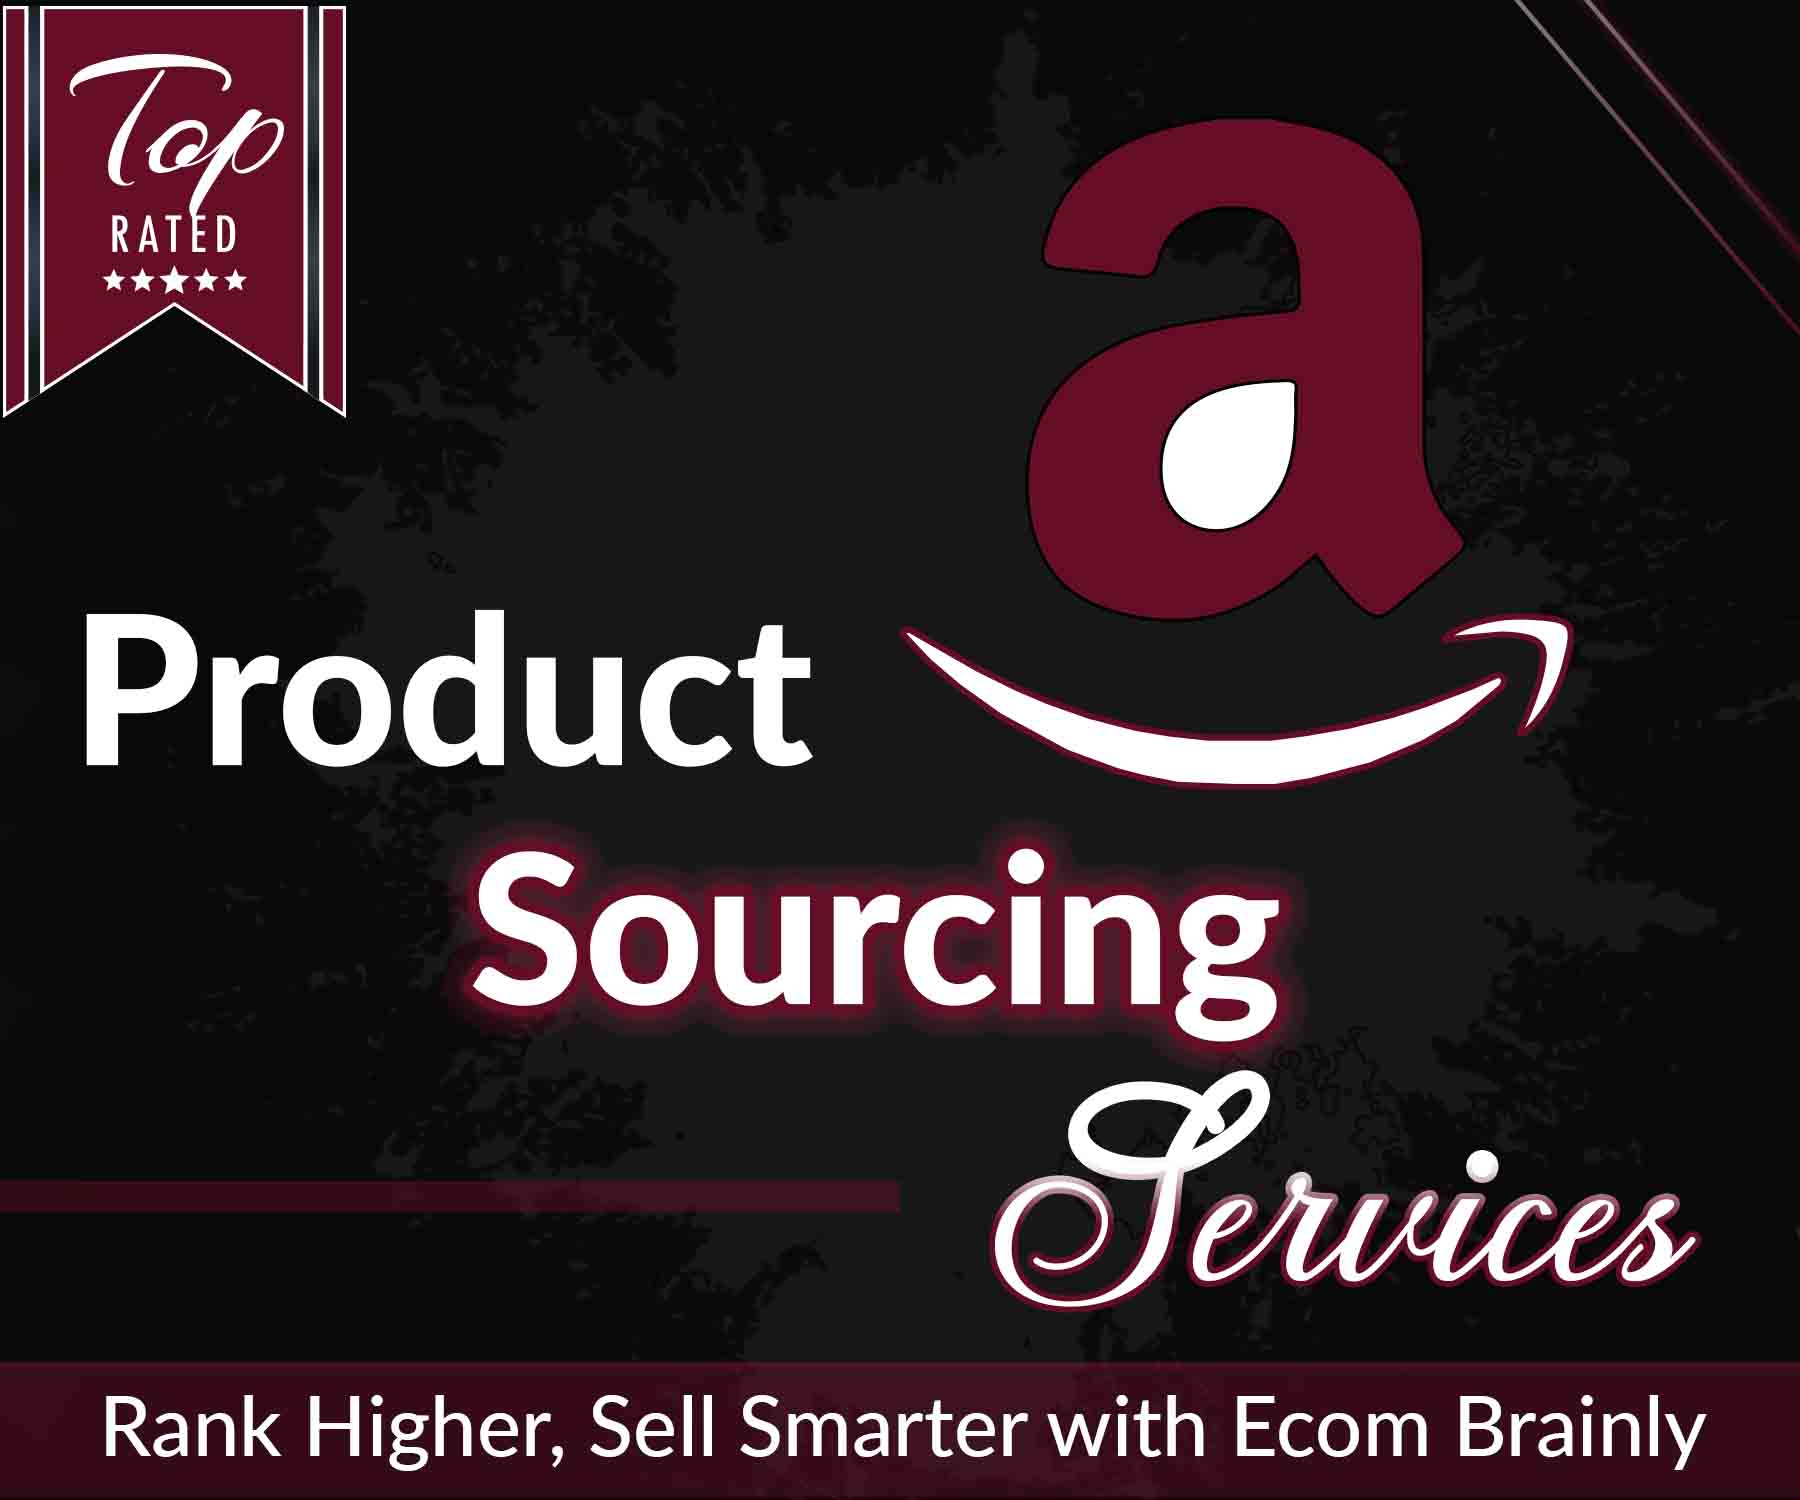 Amazon Product Sourcing Services